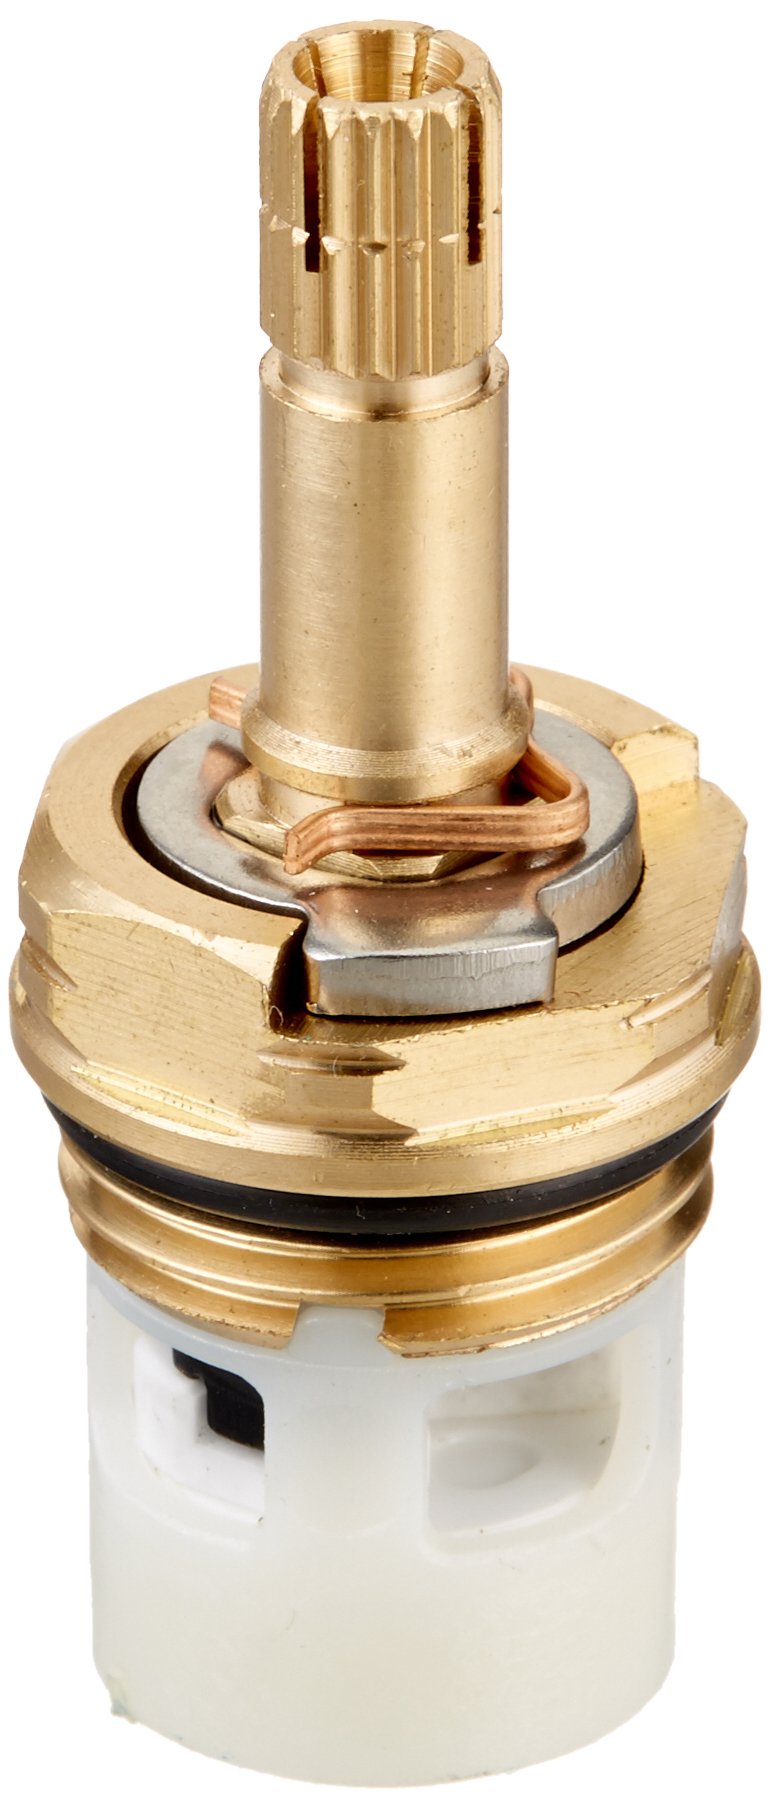  [AUSTRALIA] - Danco (10472) 4Z-24H Hot and Cold Replacement Stem for American Standard Faucets, 1-Pack, Pack of 1, Brass